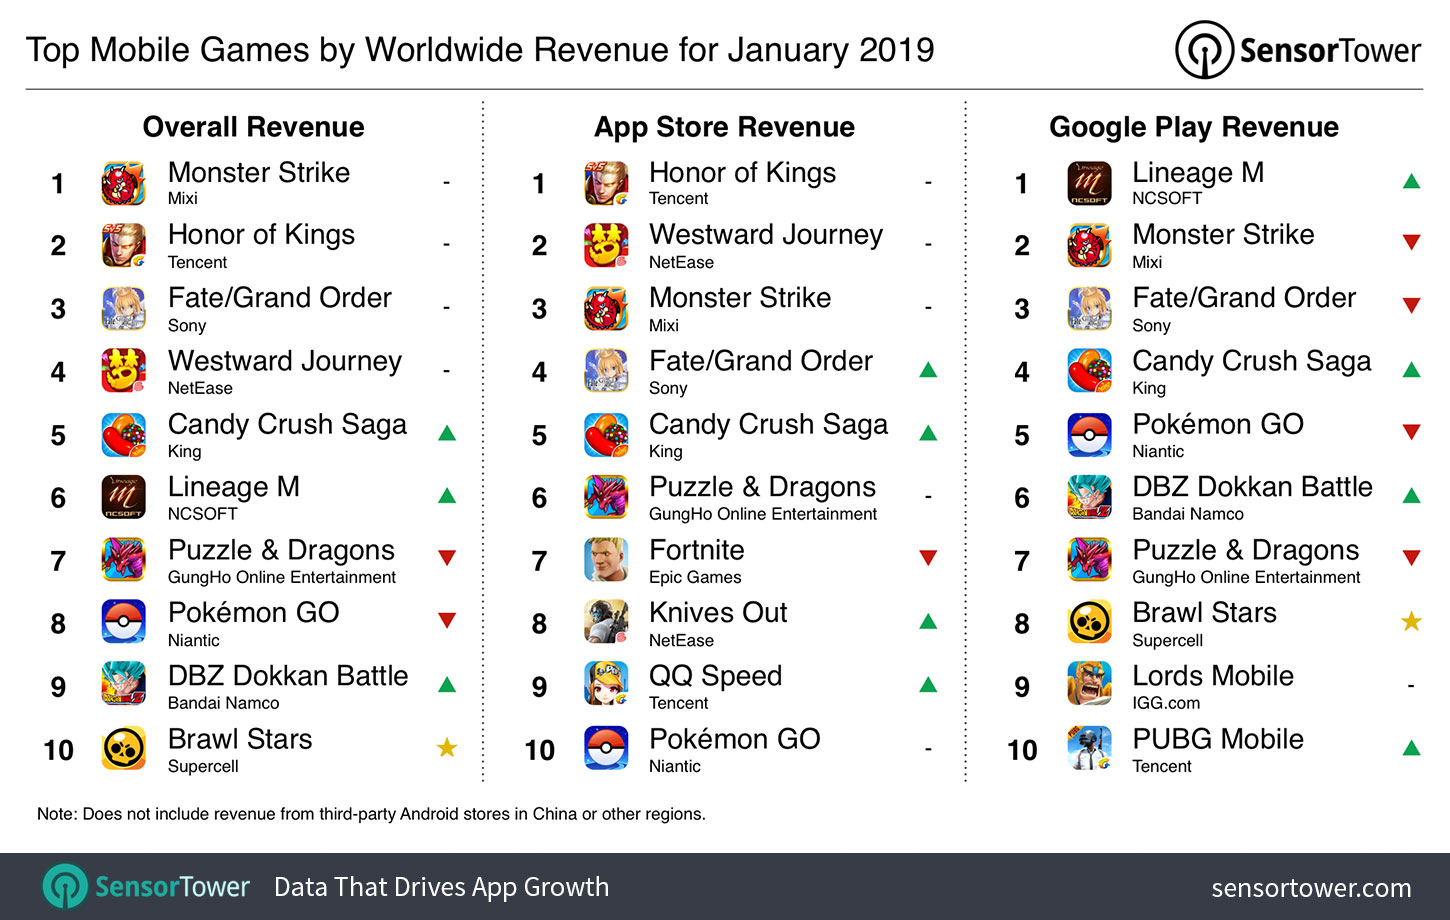 Top Mobile Games by Revenue for January 2019